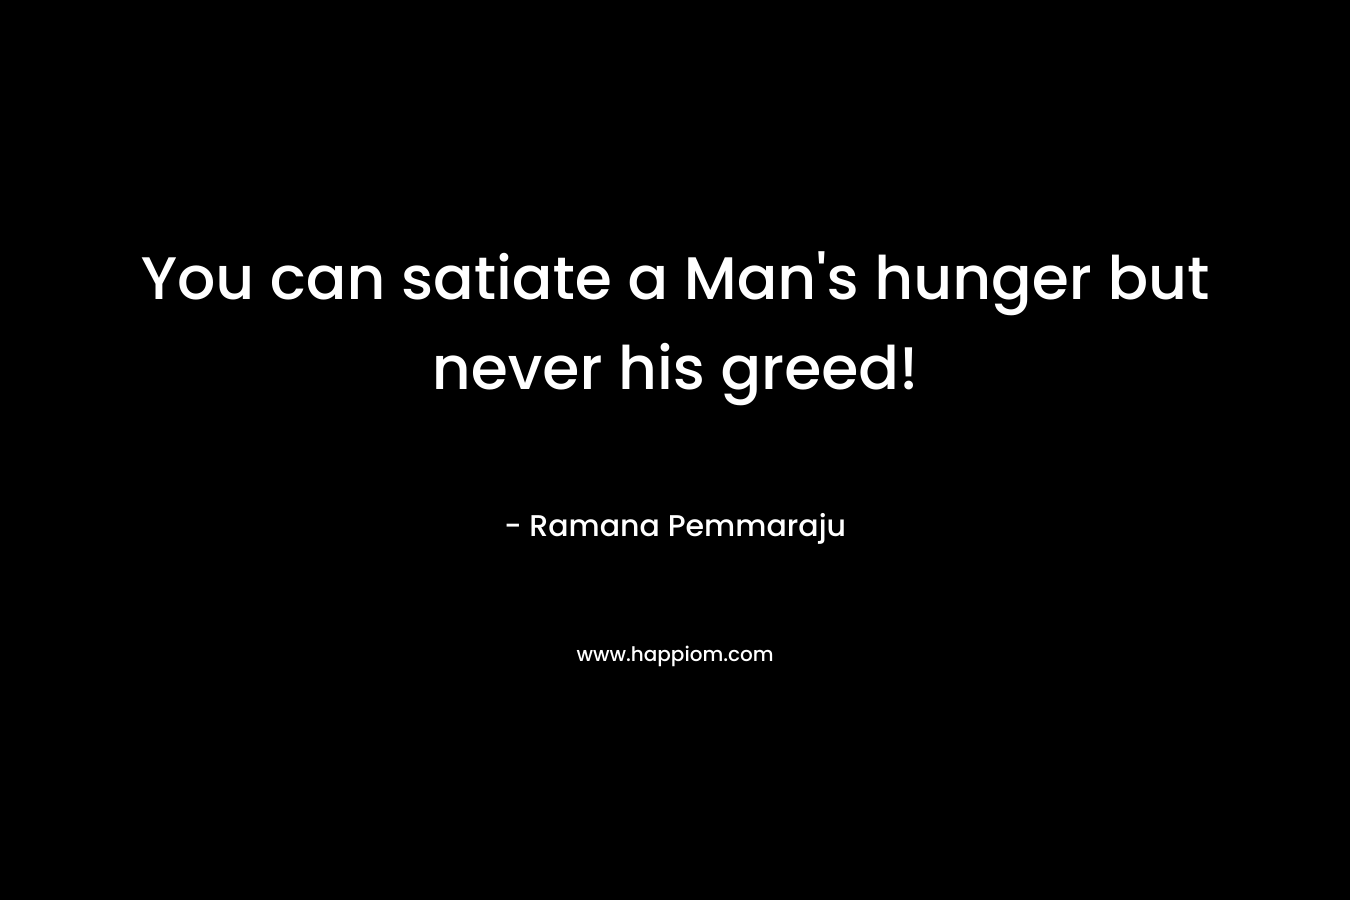 You can satiate a Man's hunger but never his greed!